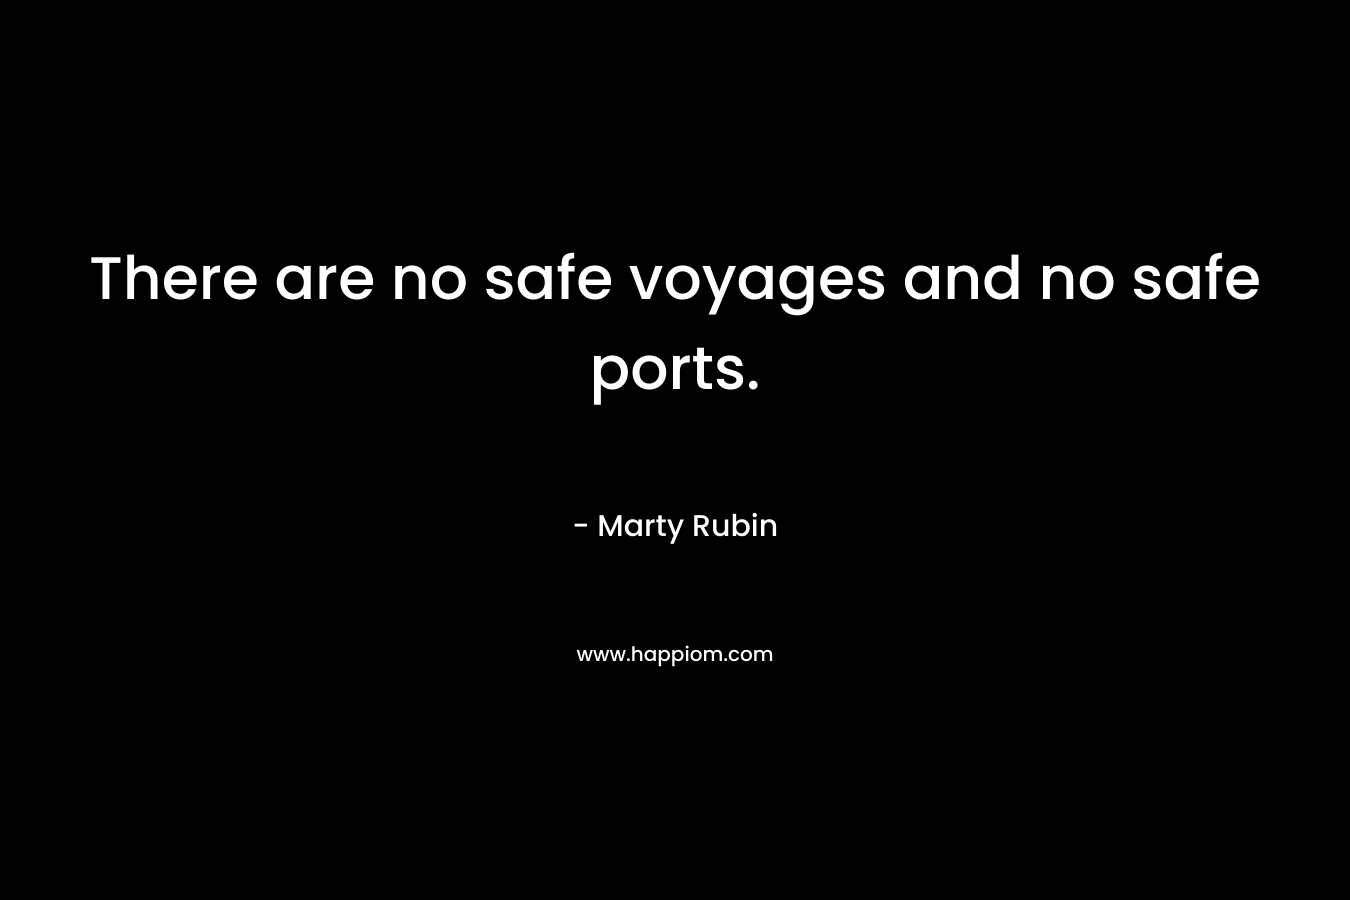 There are no safe voyages and no safe ports.